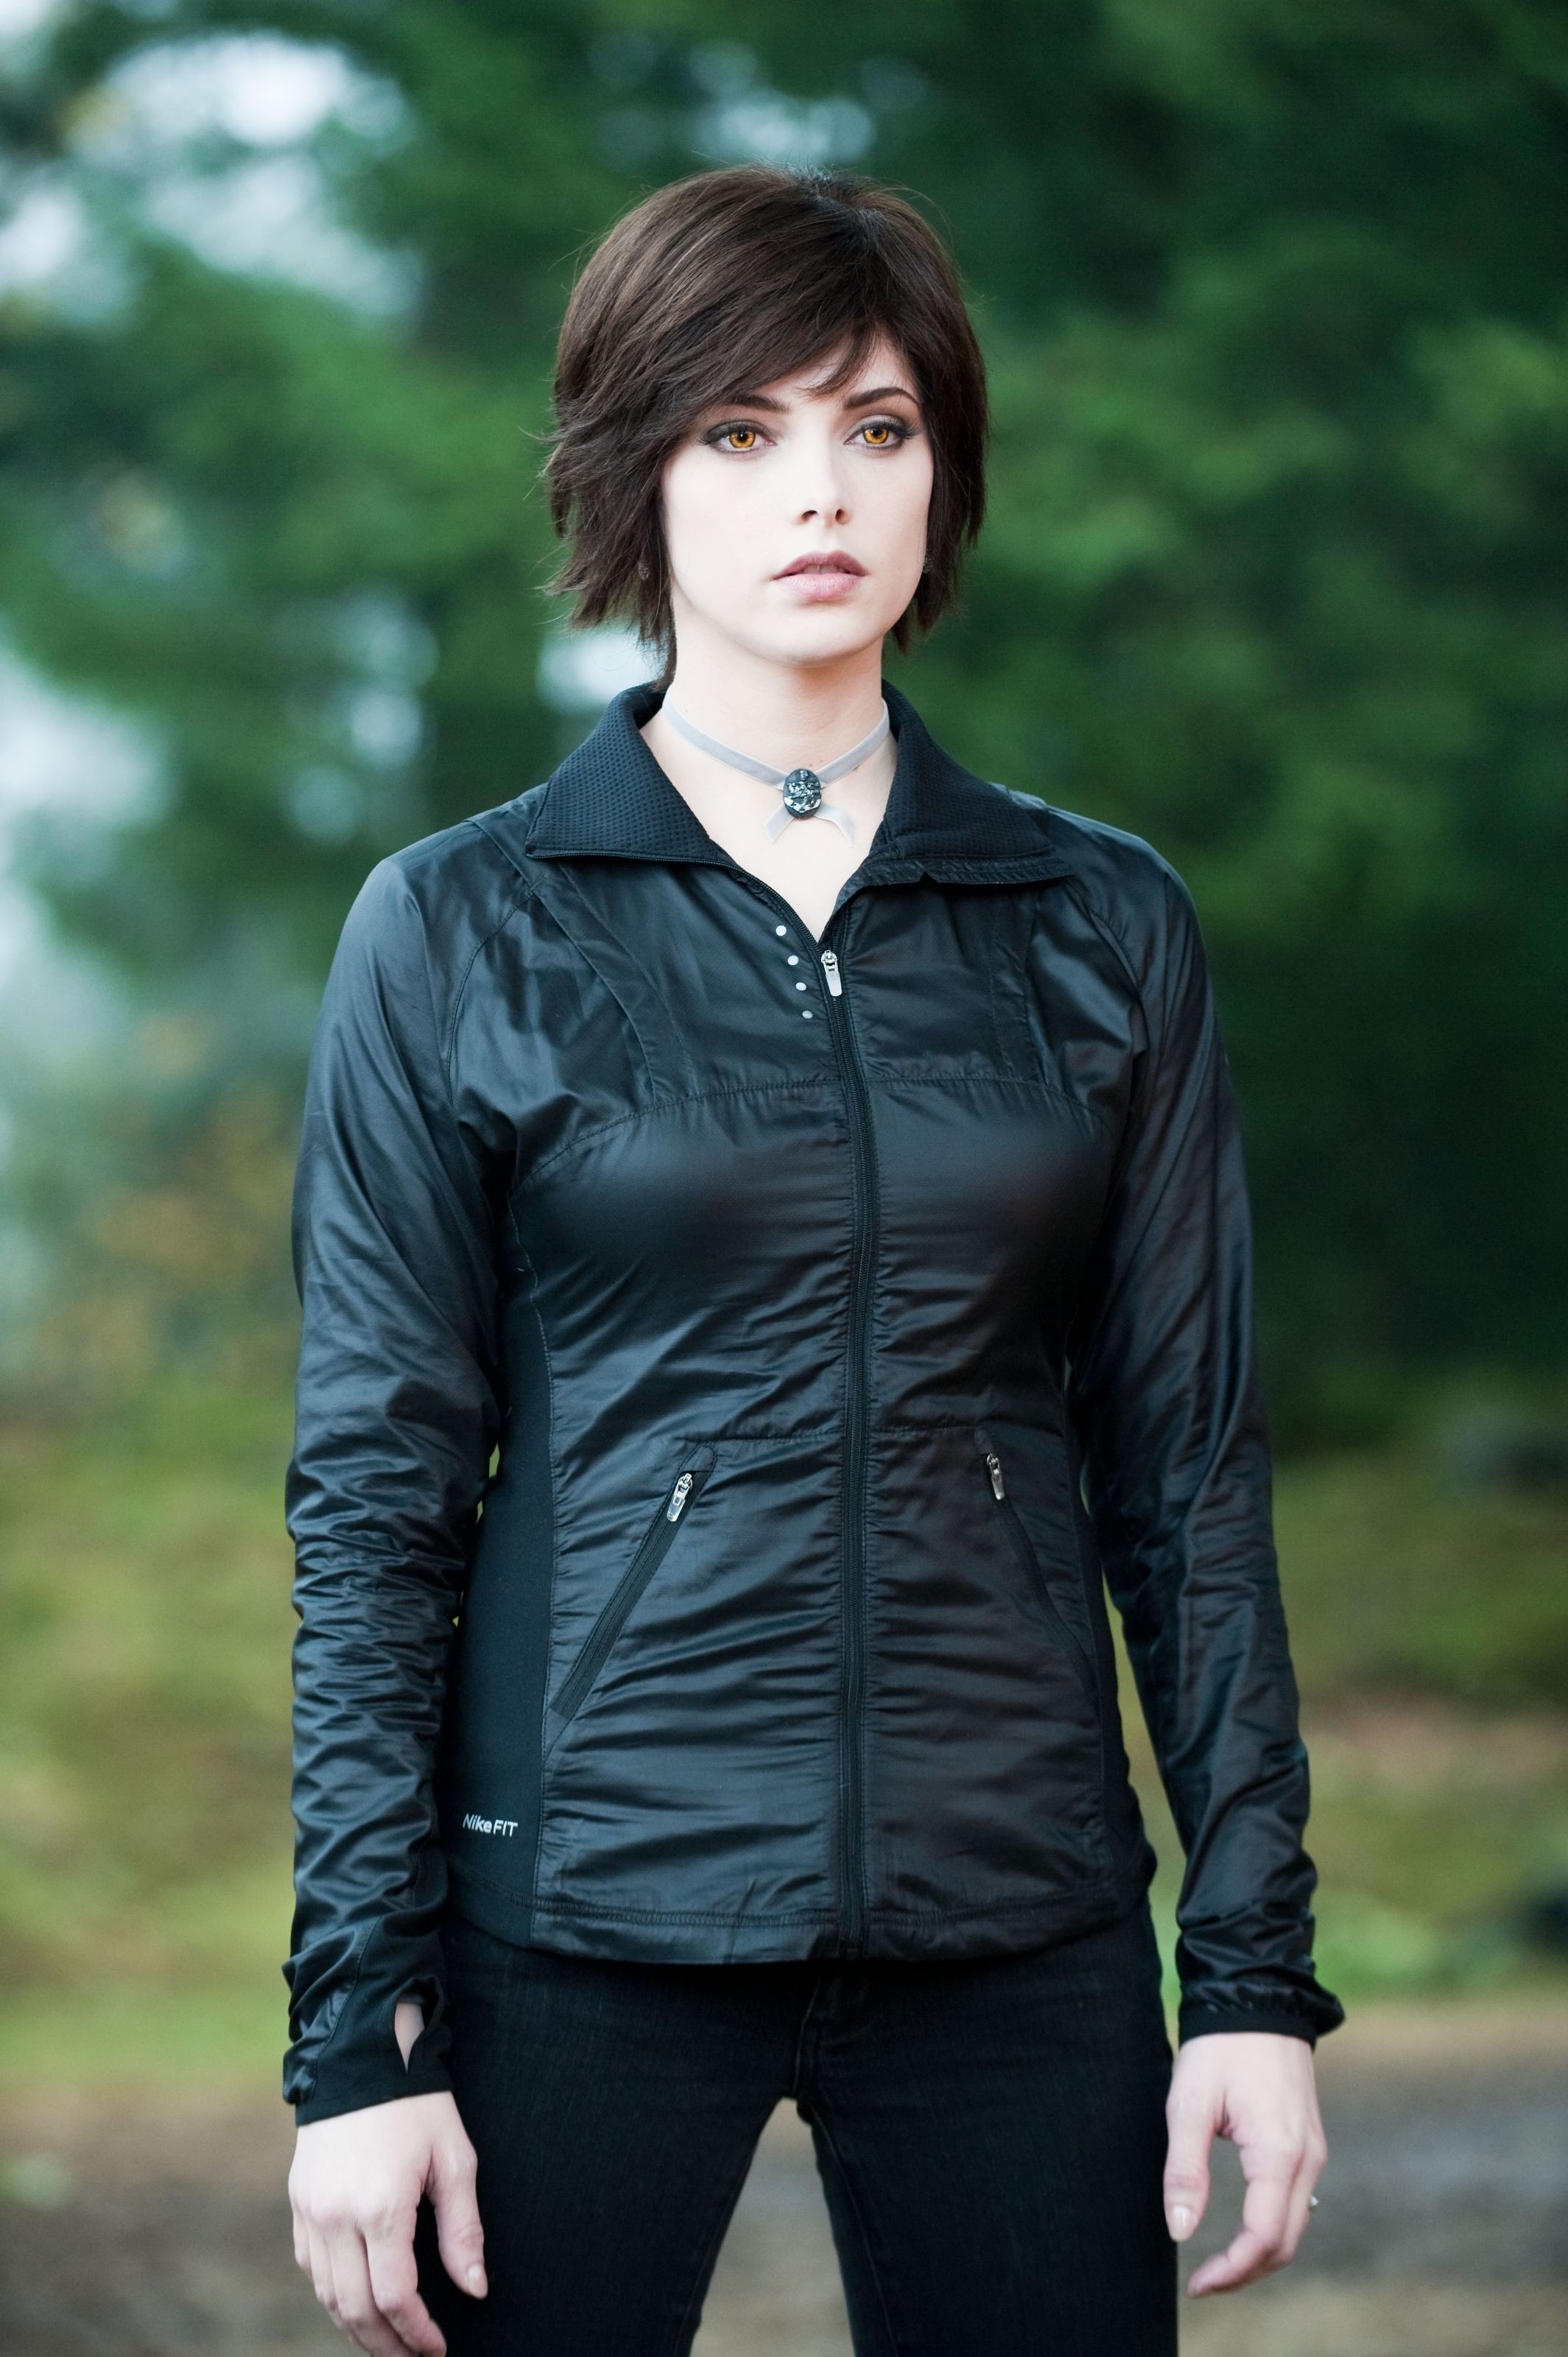 Twilight Alice Cullen wallpapers, Background pictures, Twilight Alice Cullen, Twilight movies, 2130x3200 HD Phone